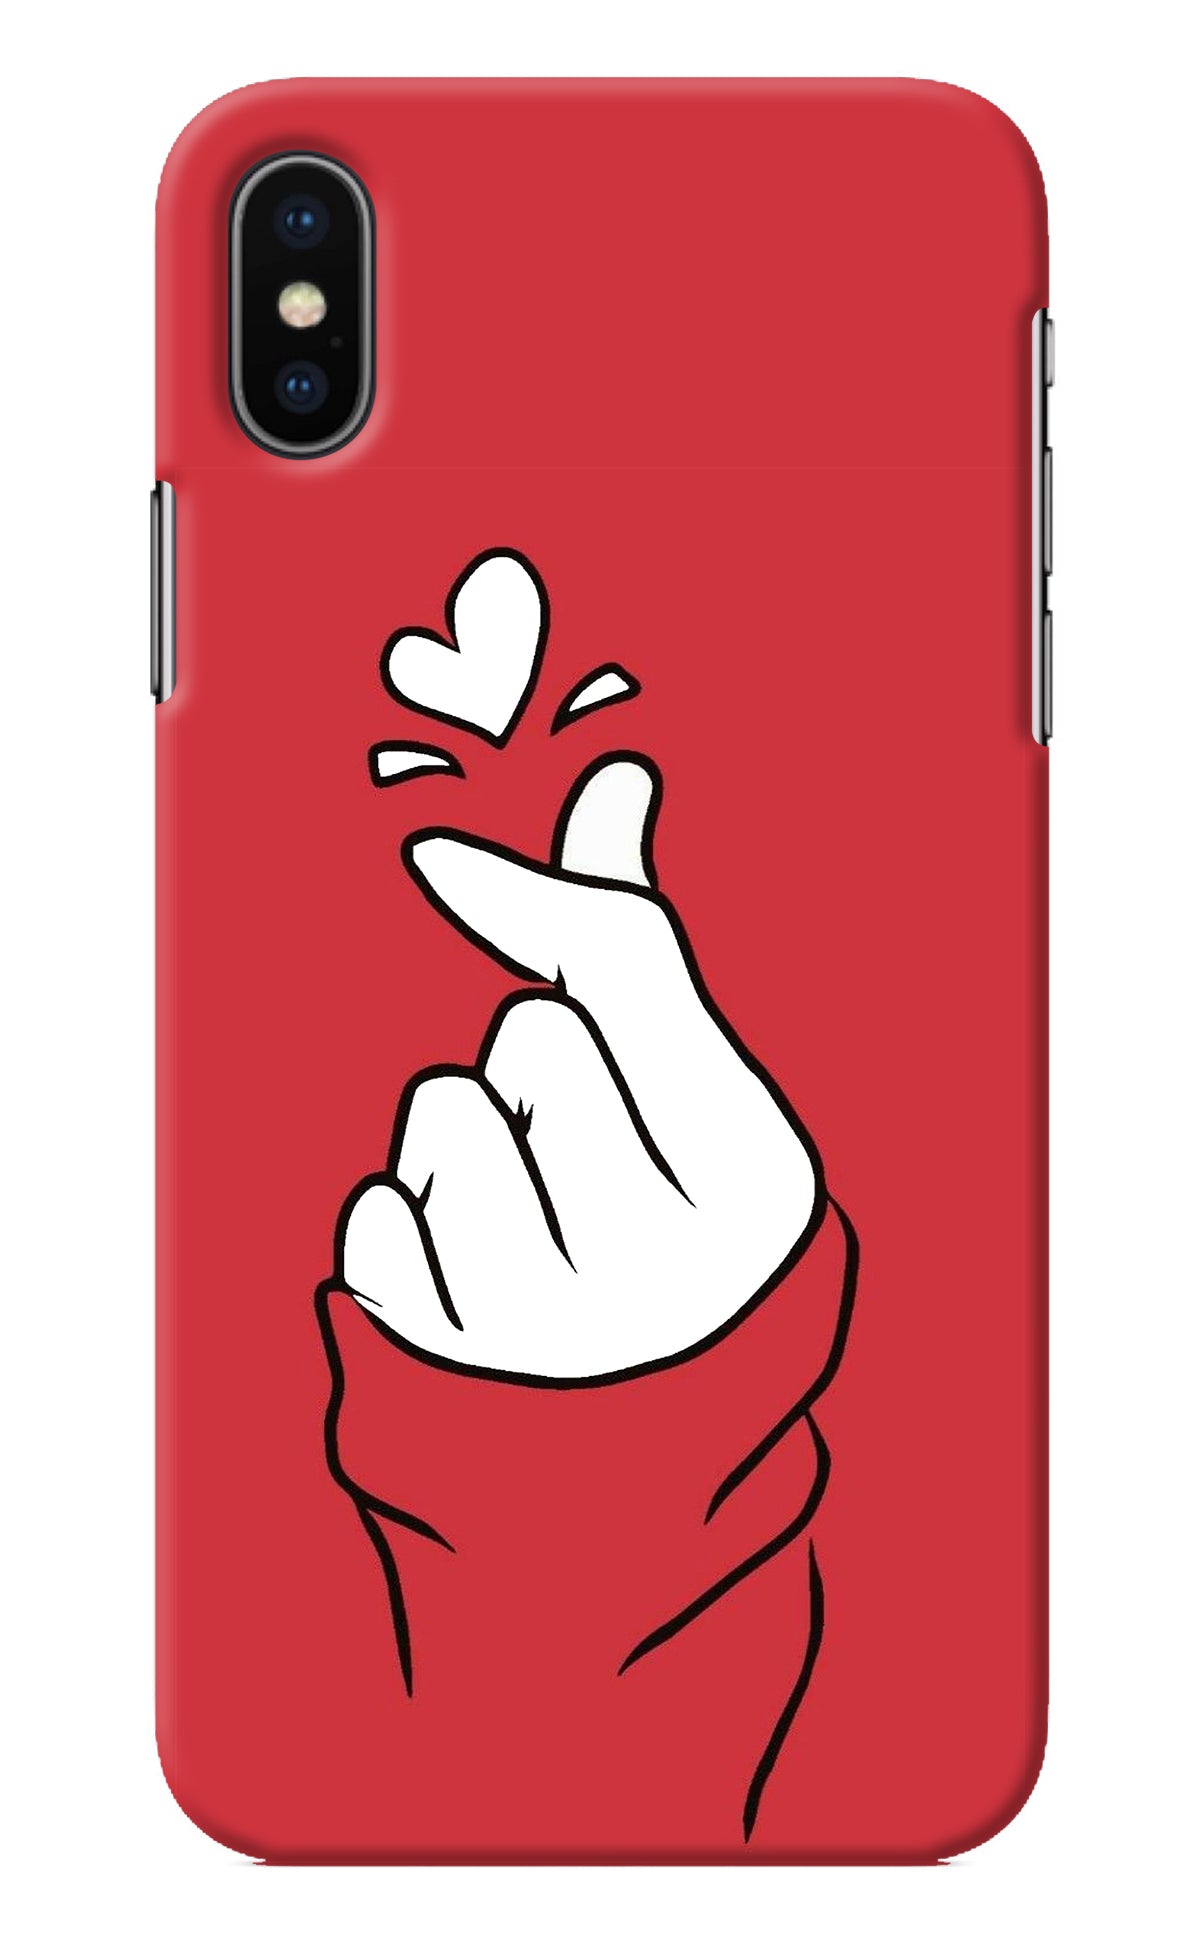 Korean Love Sign iPhone X Back Cover